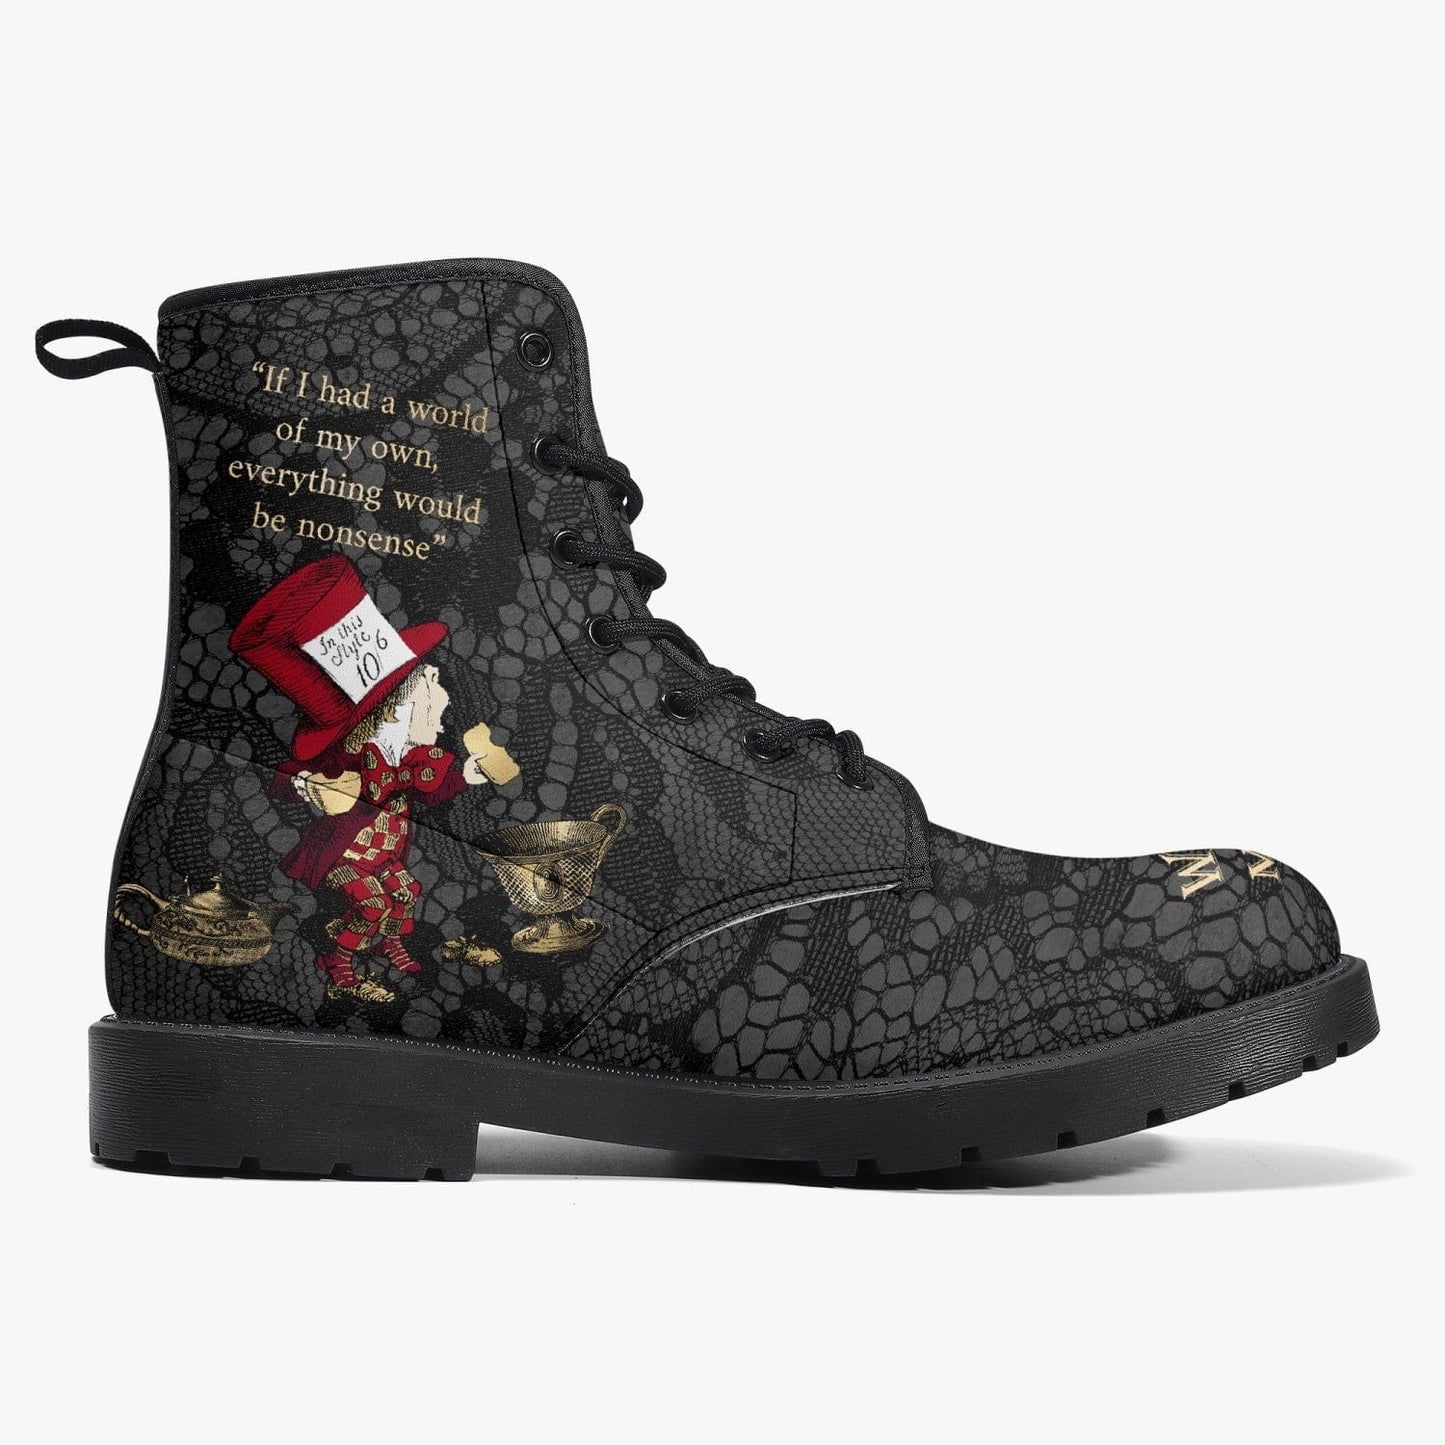 Mad Hatter and his quote on the gothic black gold and red vegan boots featuring Alice in Wonderland quotes